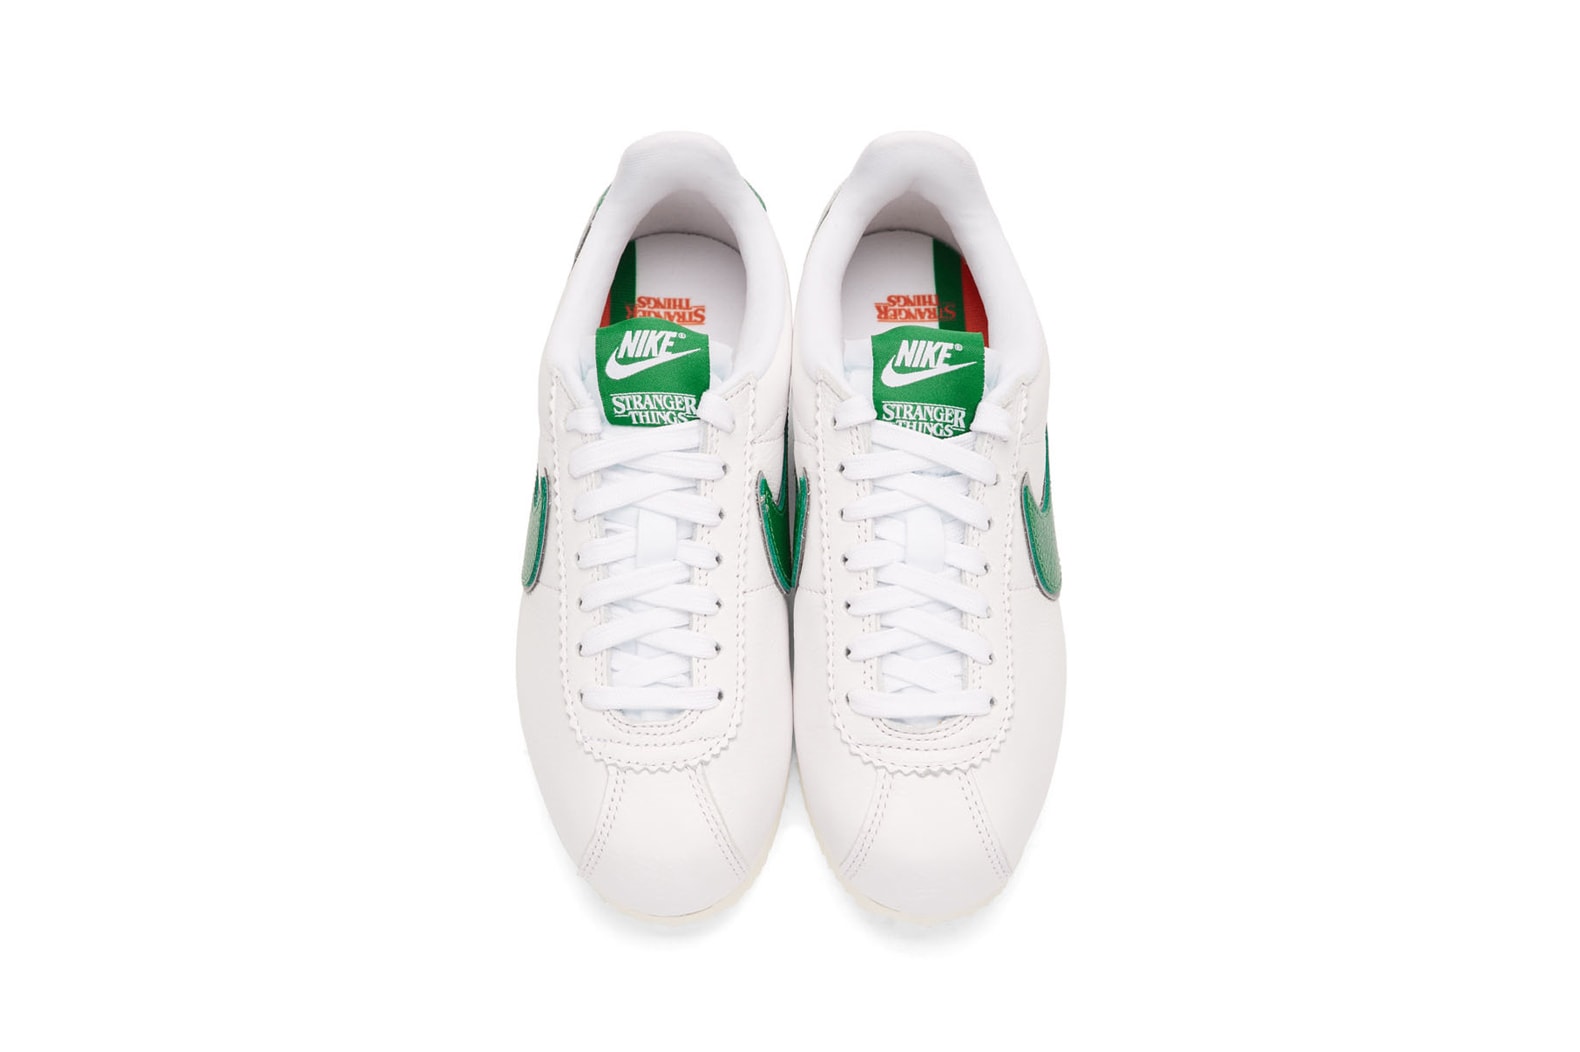 Stranger Things x Nike Air Tailwind Cortez Pine Green White Cosmic Clay